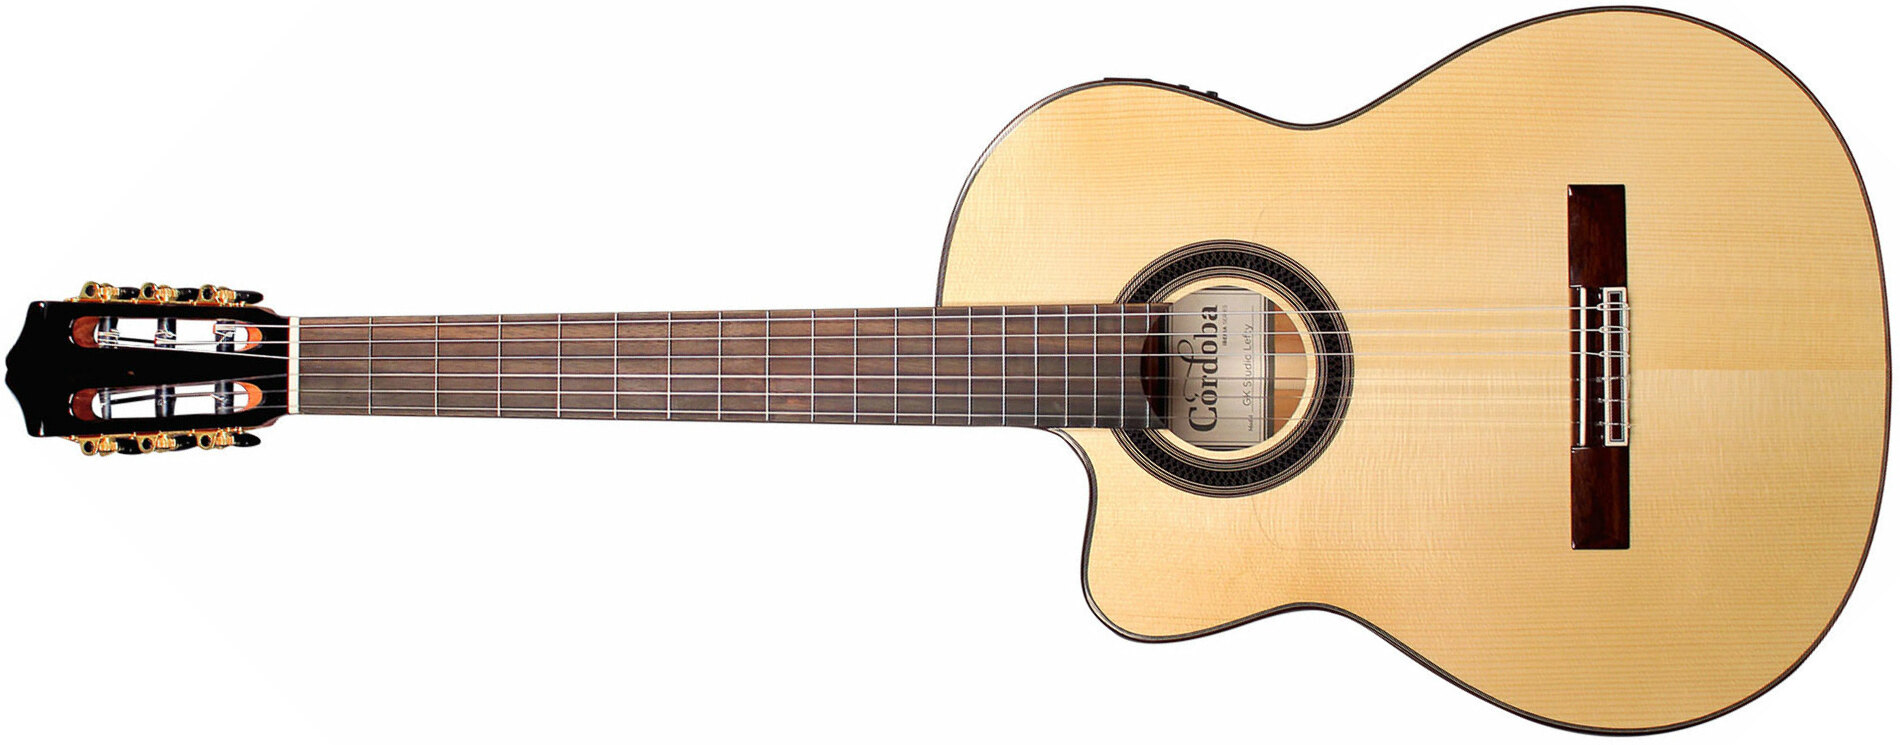 Cordoba Gipsy Kings Gk Studio Lh Gaucher Cw Epicea Cypres Rw - Natural - Classical guitar 4/4 size - Main picture